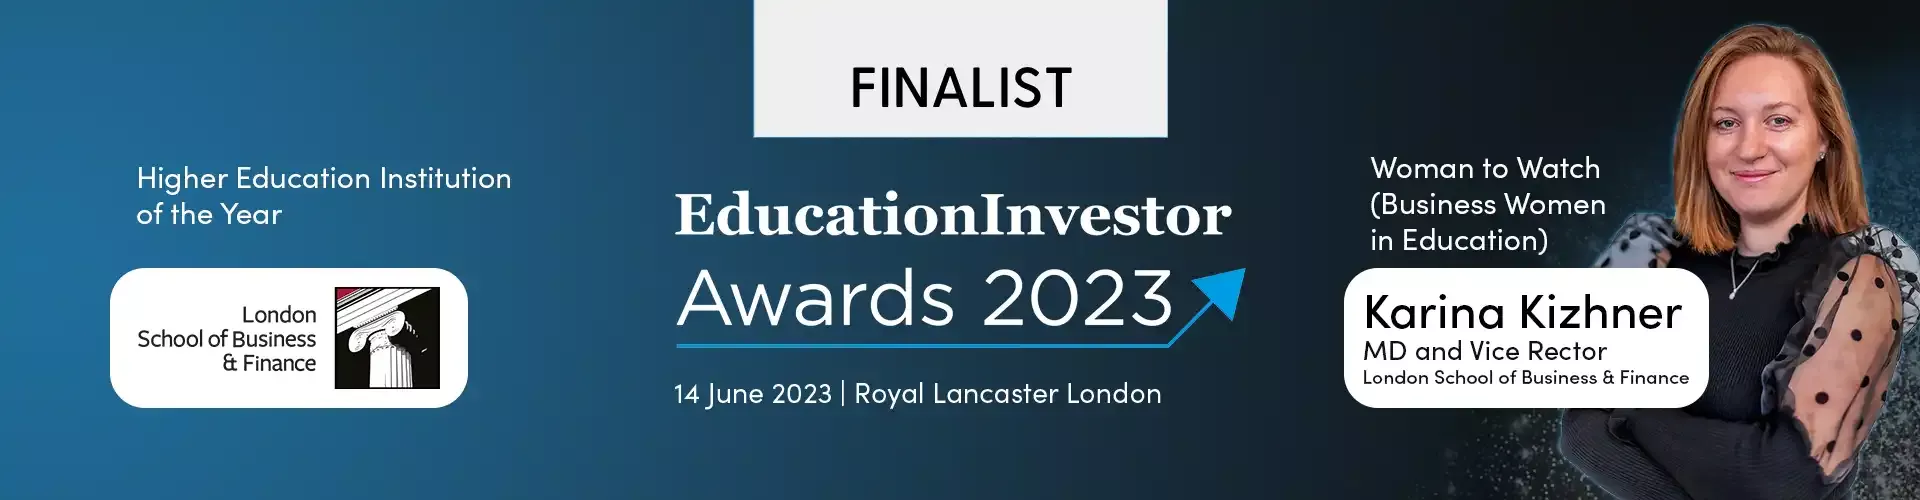 LSBF Finalists in Two Categories at EducationInvestor Awards 2023